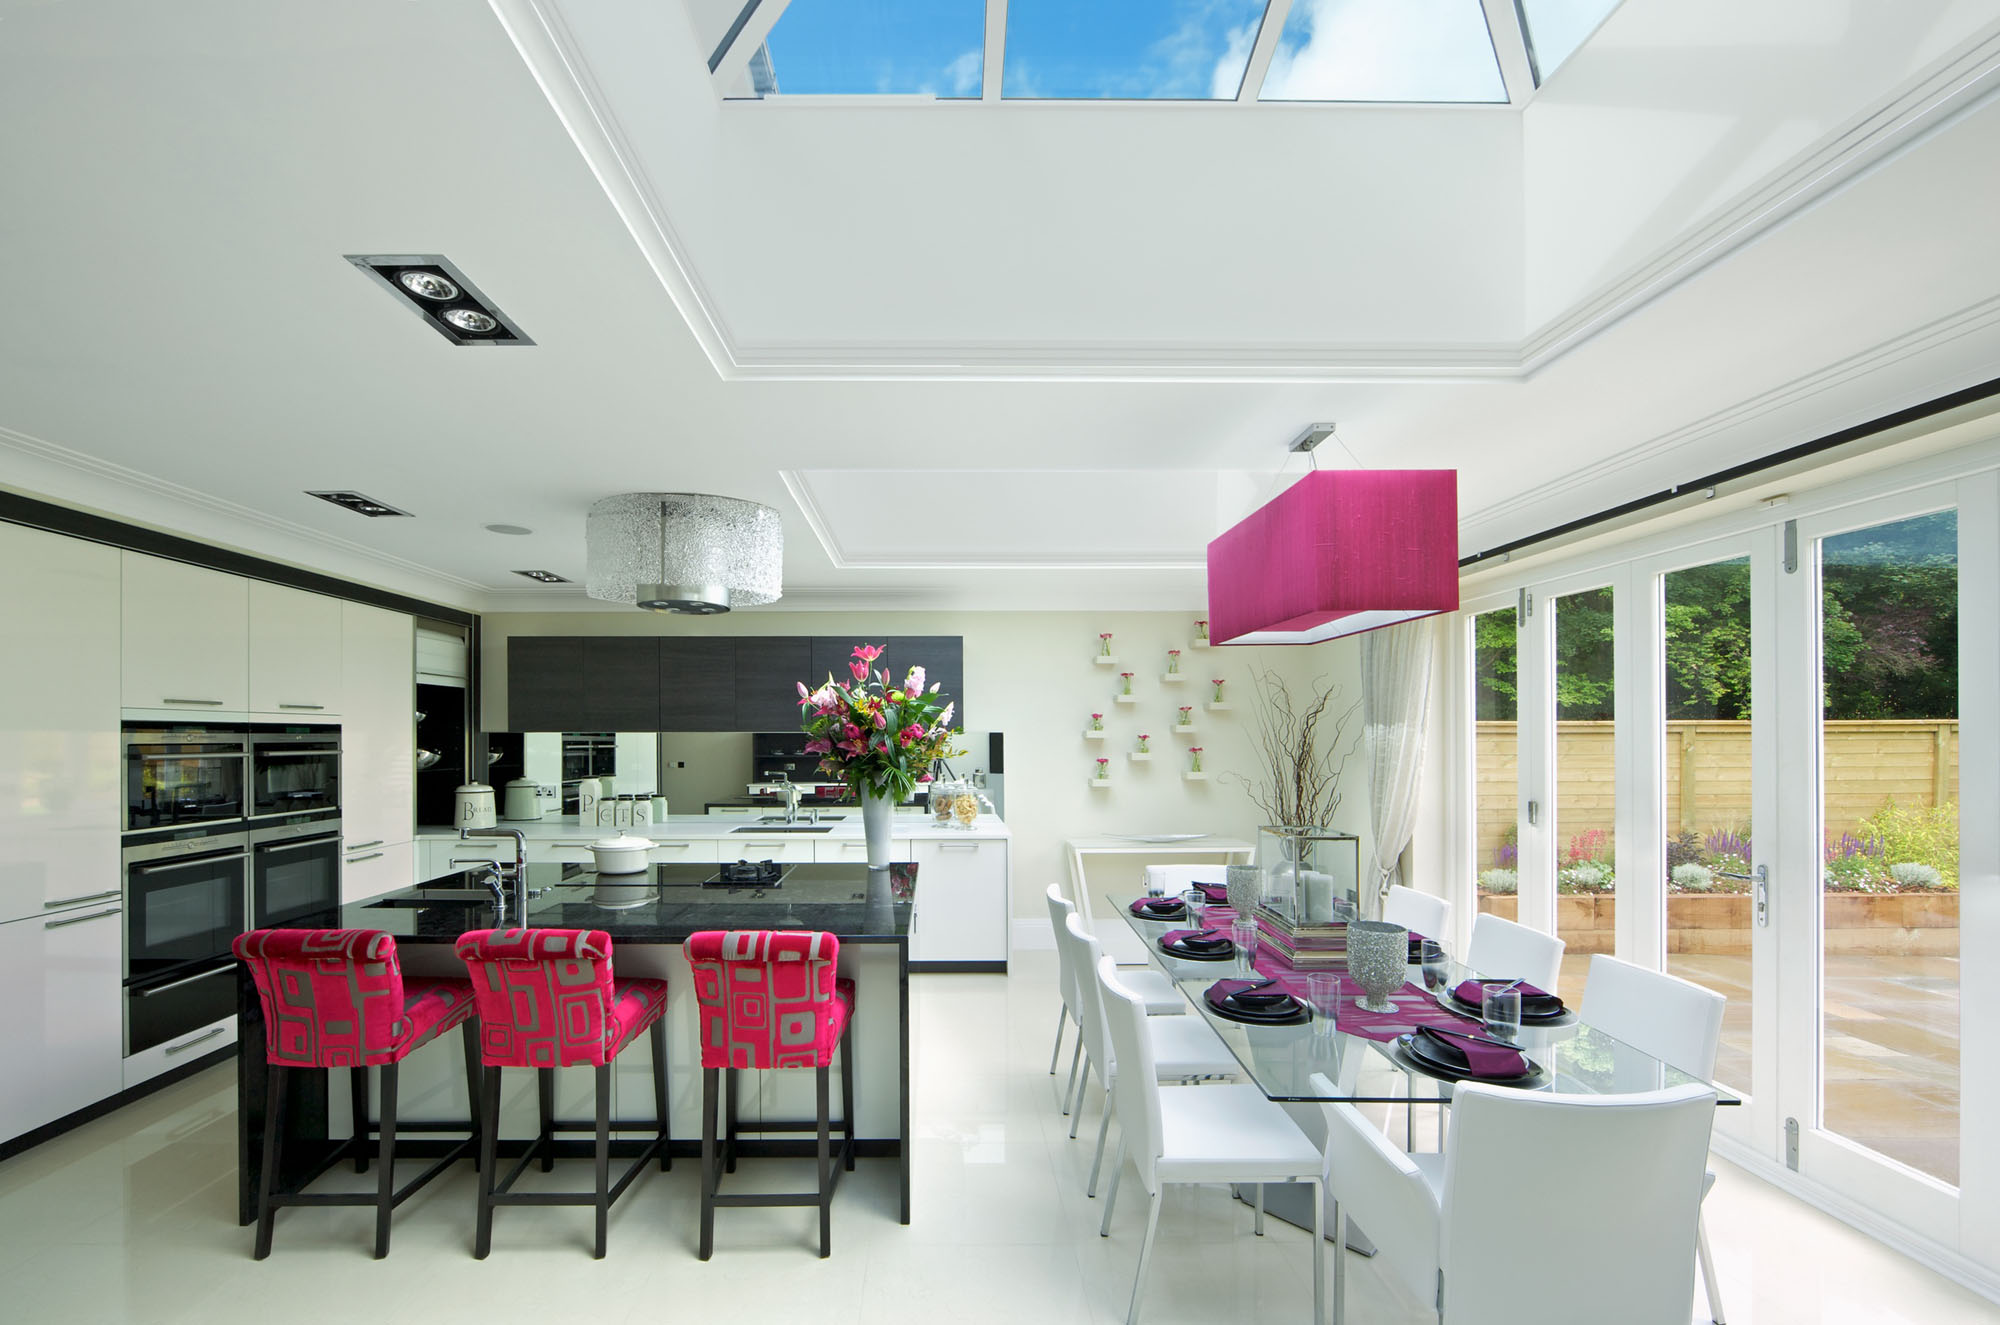 Beautiful dinning area with a sliding window in the right